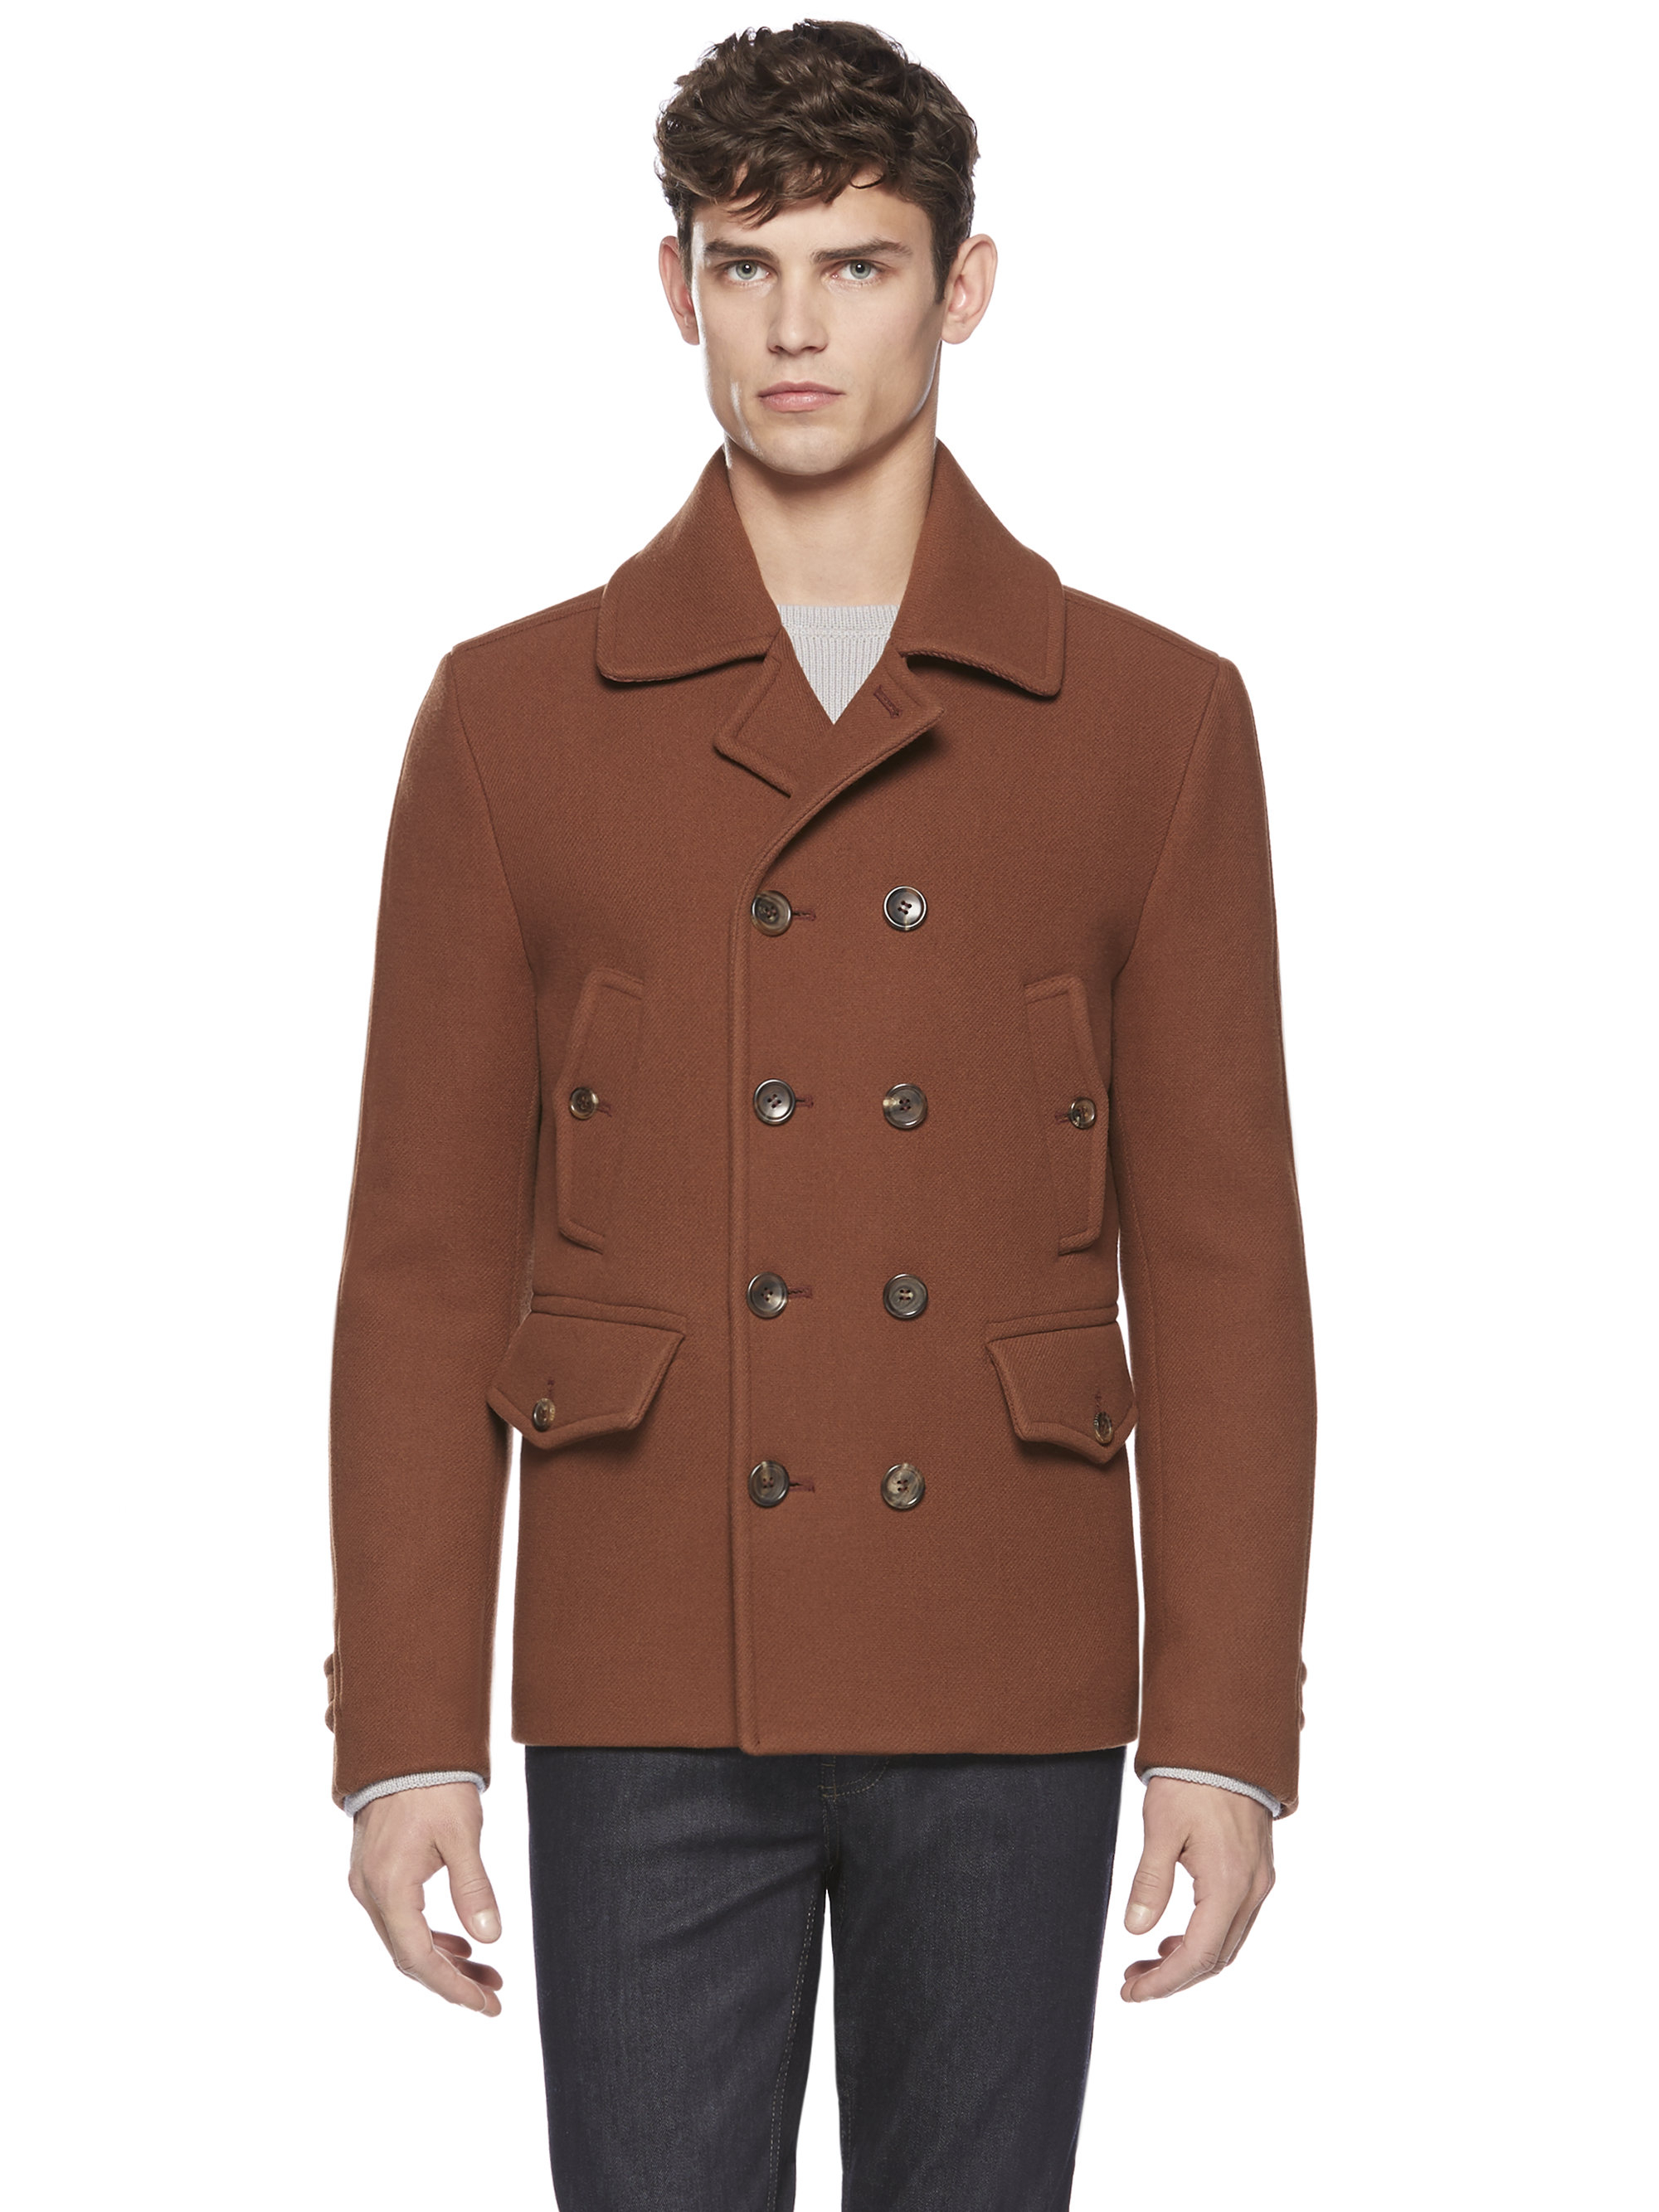 Lyst - Gucci Doublebreasted Wool Peacoat in Brown for Men